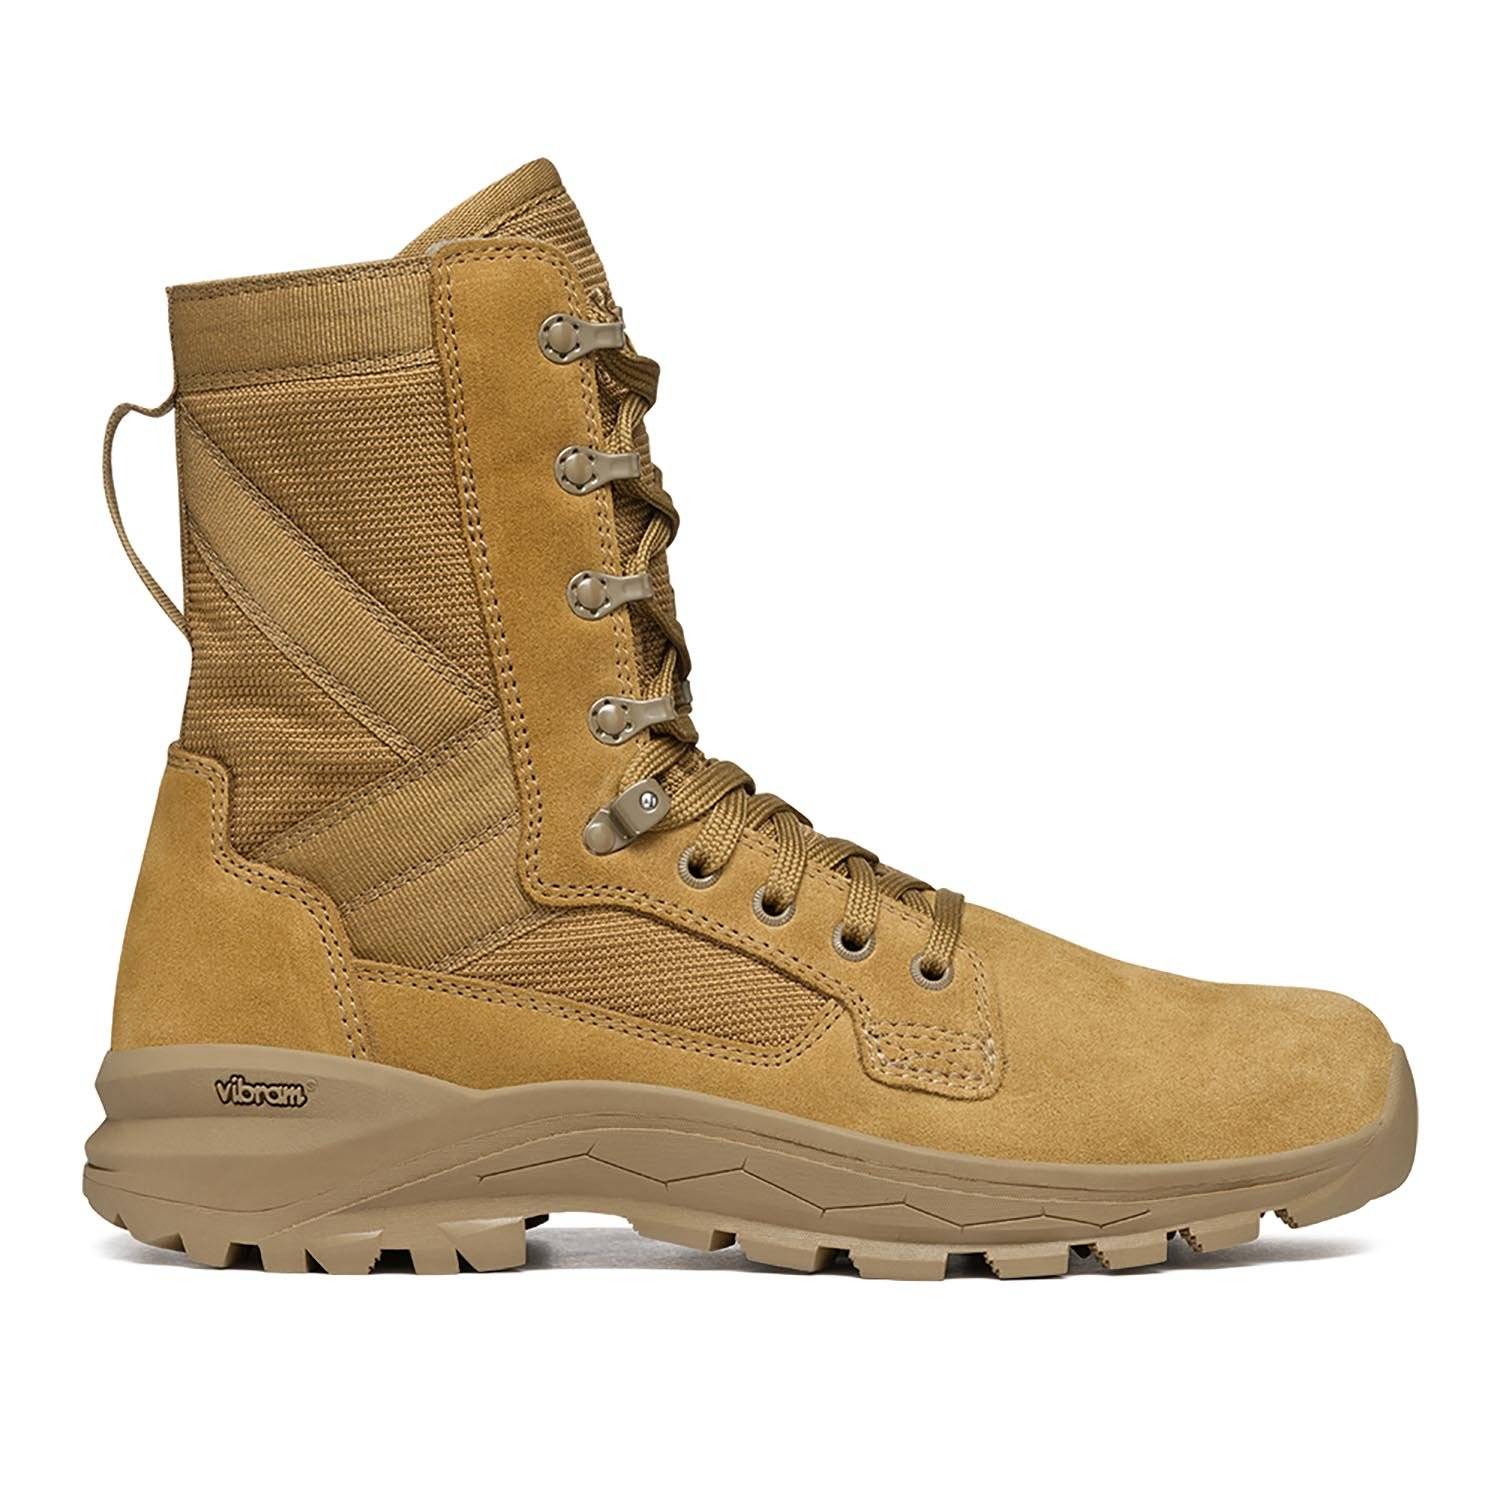 Garmont T8 Extreme EVO 200g Thinsulate Boots